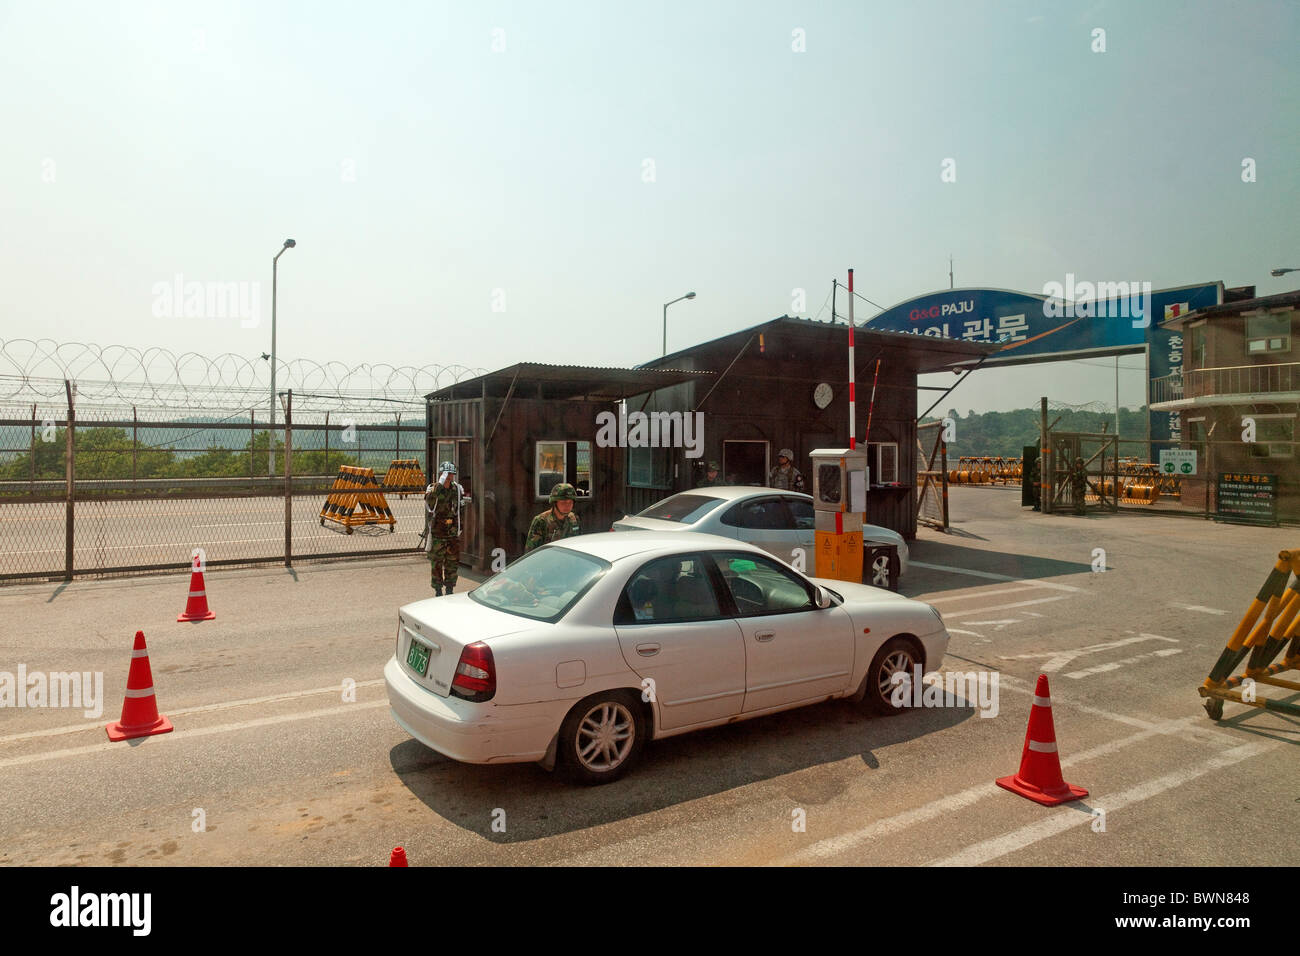 Checkpoint on the road at the entrance to the JSA Joint Security Area at DMZ Demilitarized Zone, South Korea. JMH3832 Stock Photo